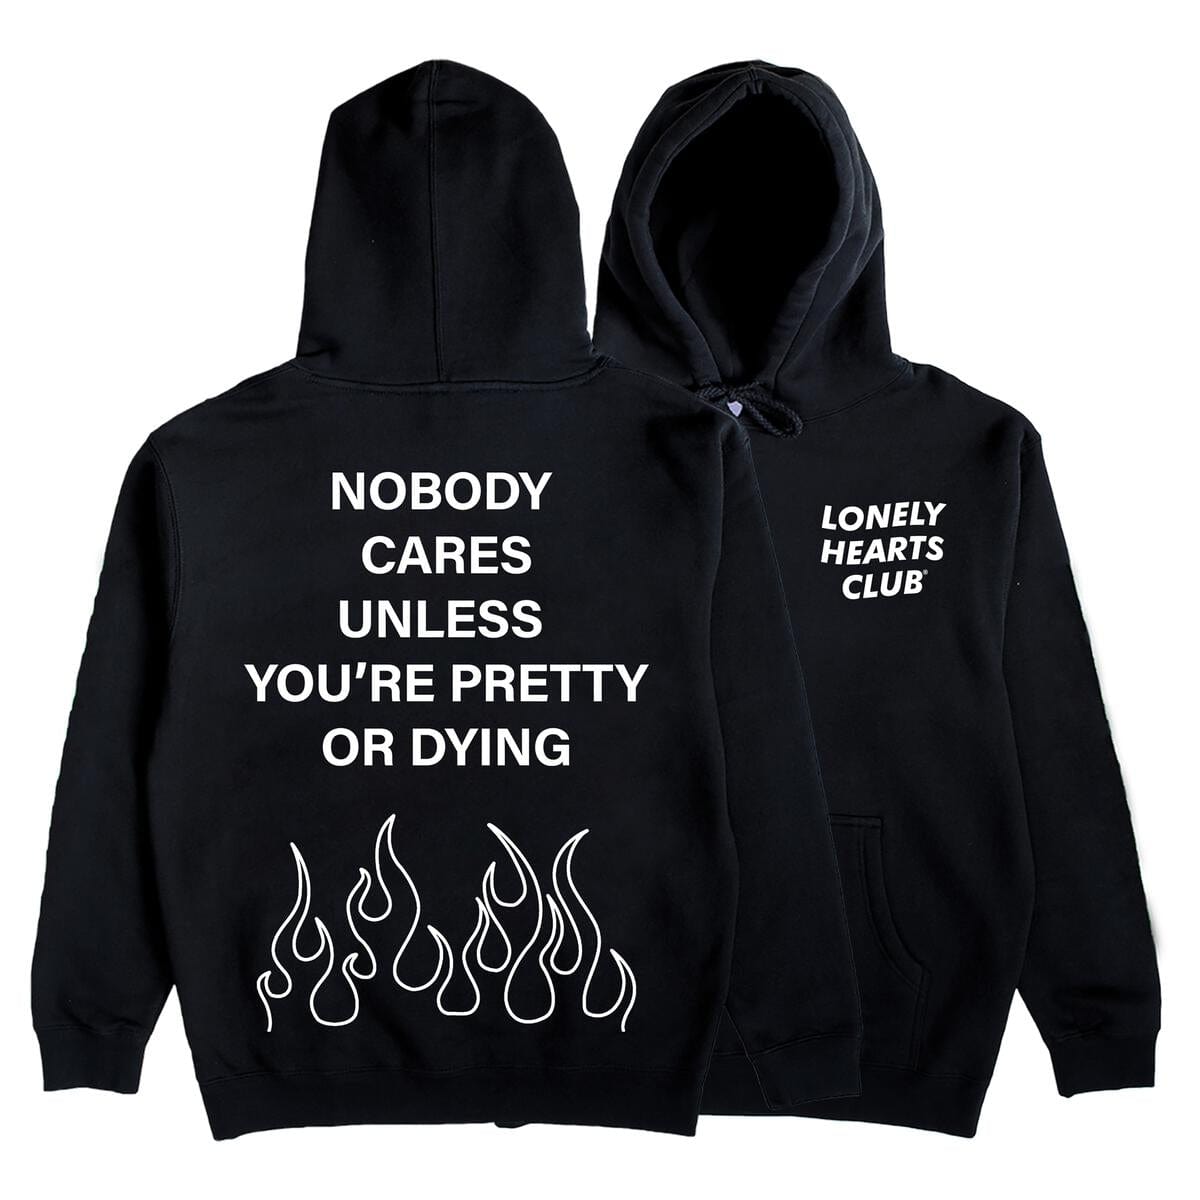 LONLY HEARTS T SHIRT S / black Nobody Cares Hoodie